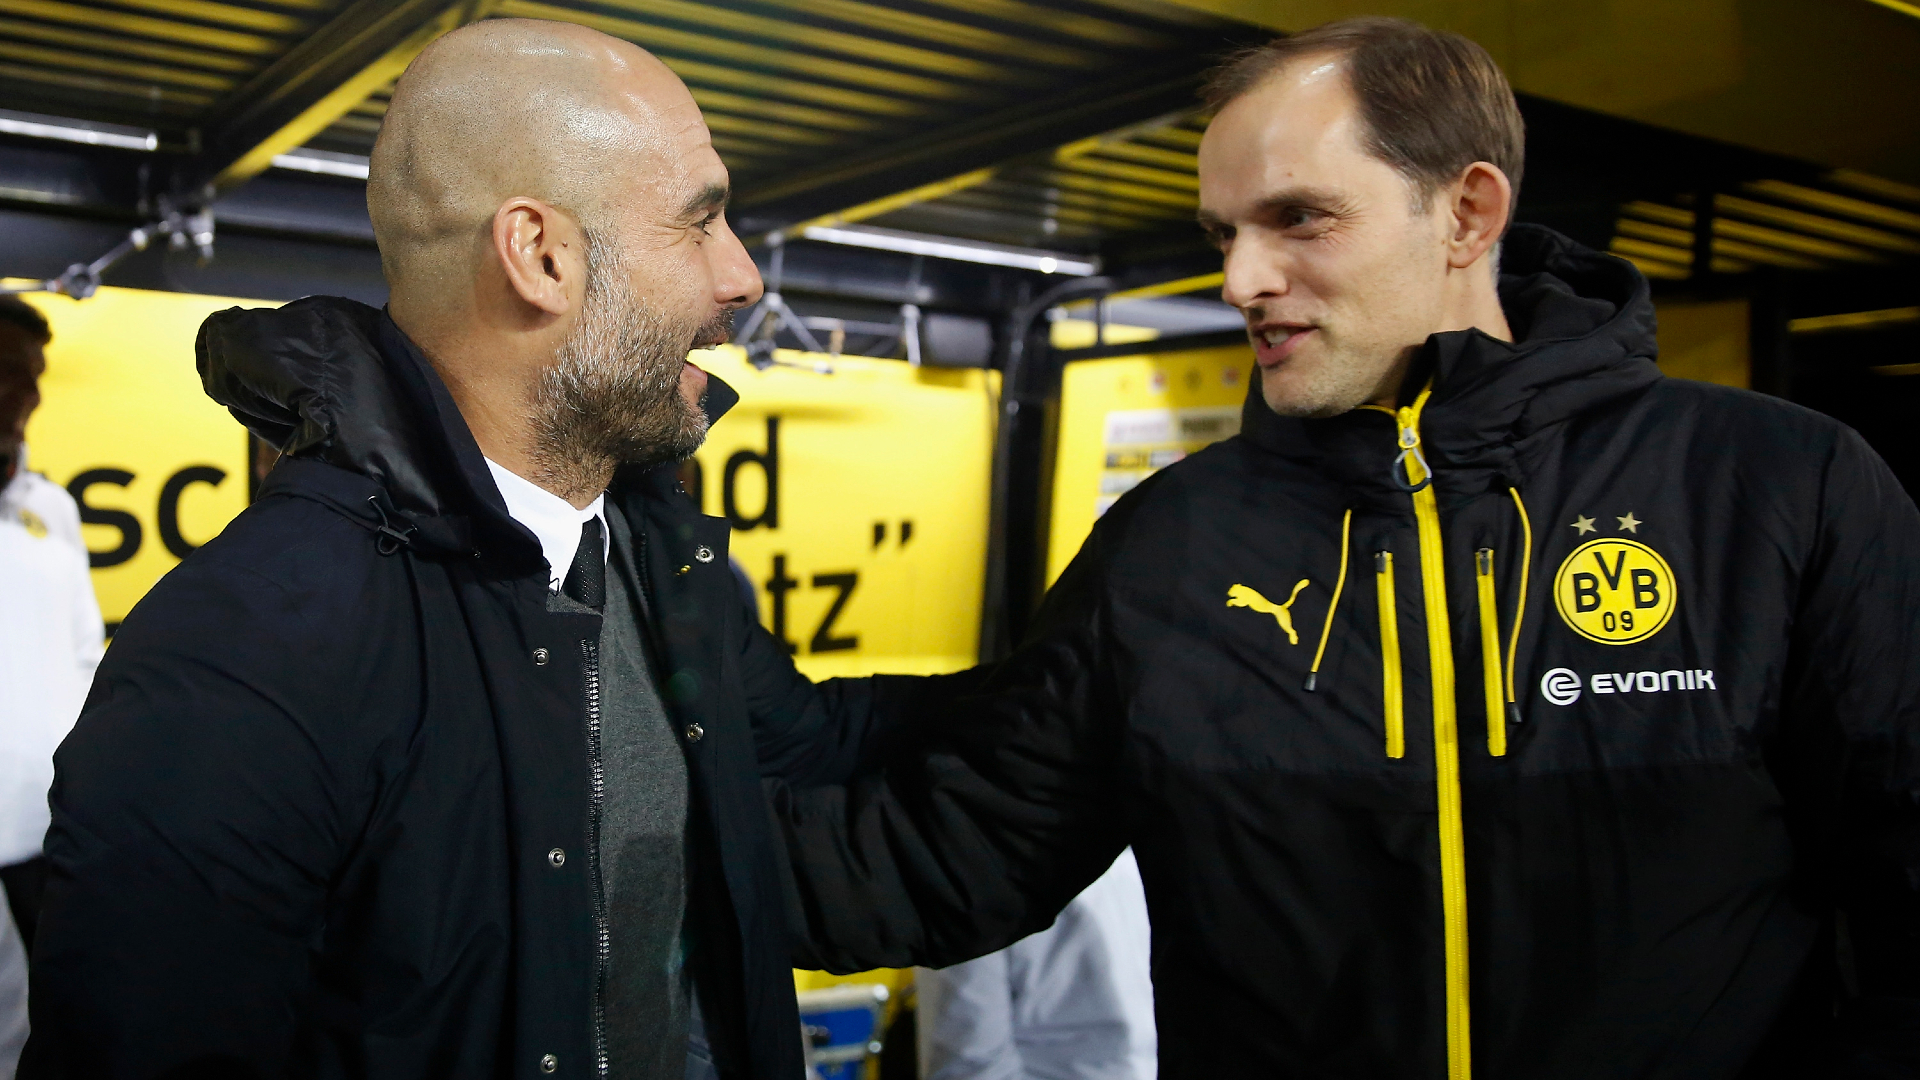 Thomas Tuchel was welcomed to the Premier League by Manchester City manager Pep Guardiola.